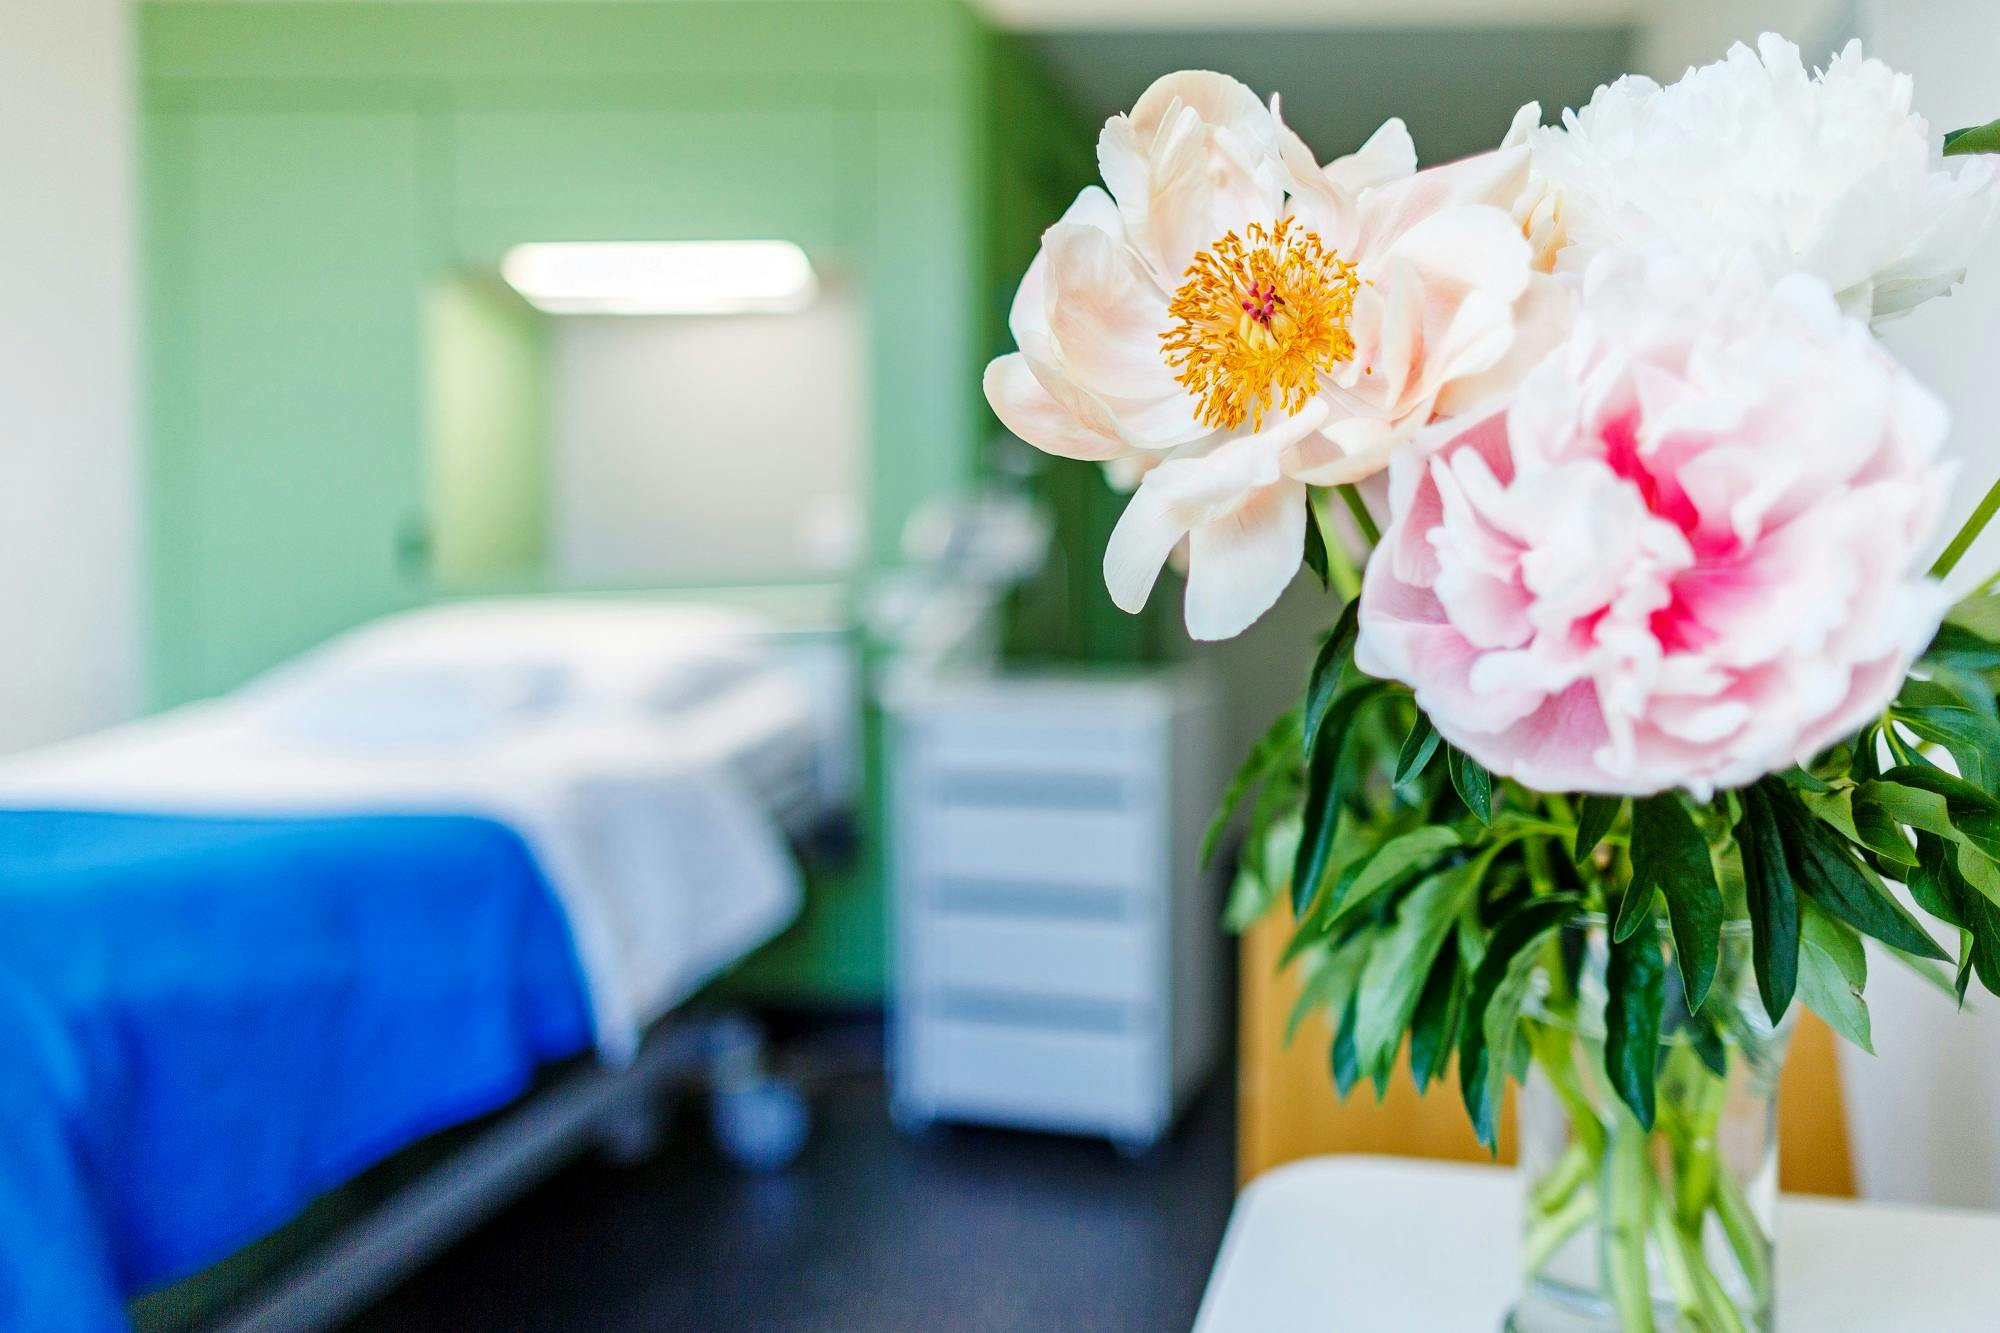 Close-up of peonies with a blurred background of a hospital room.